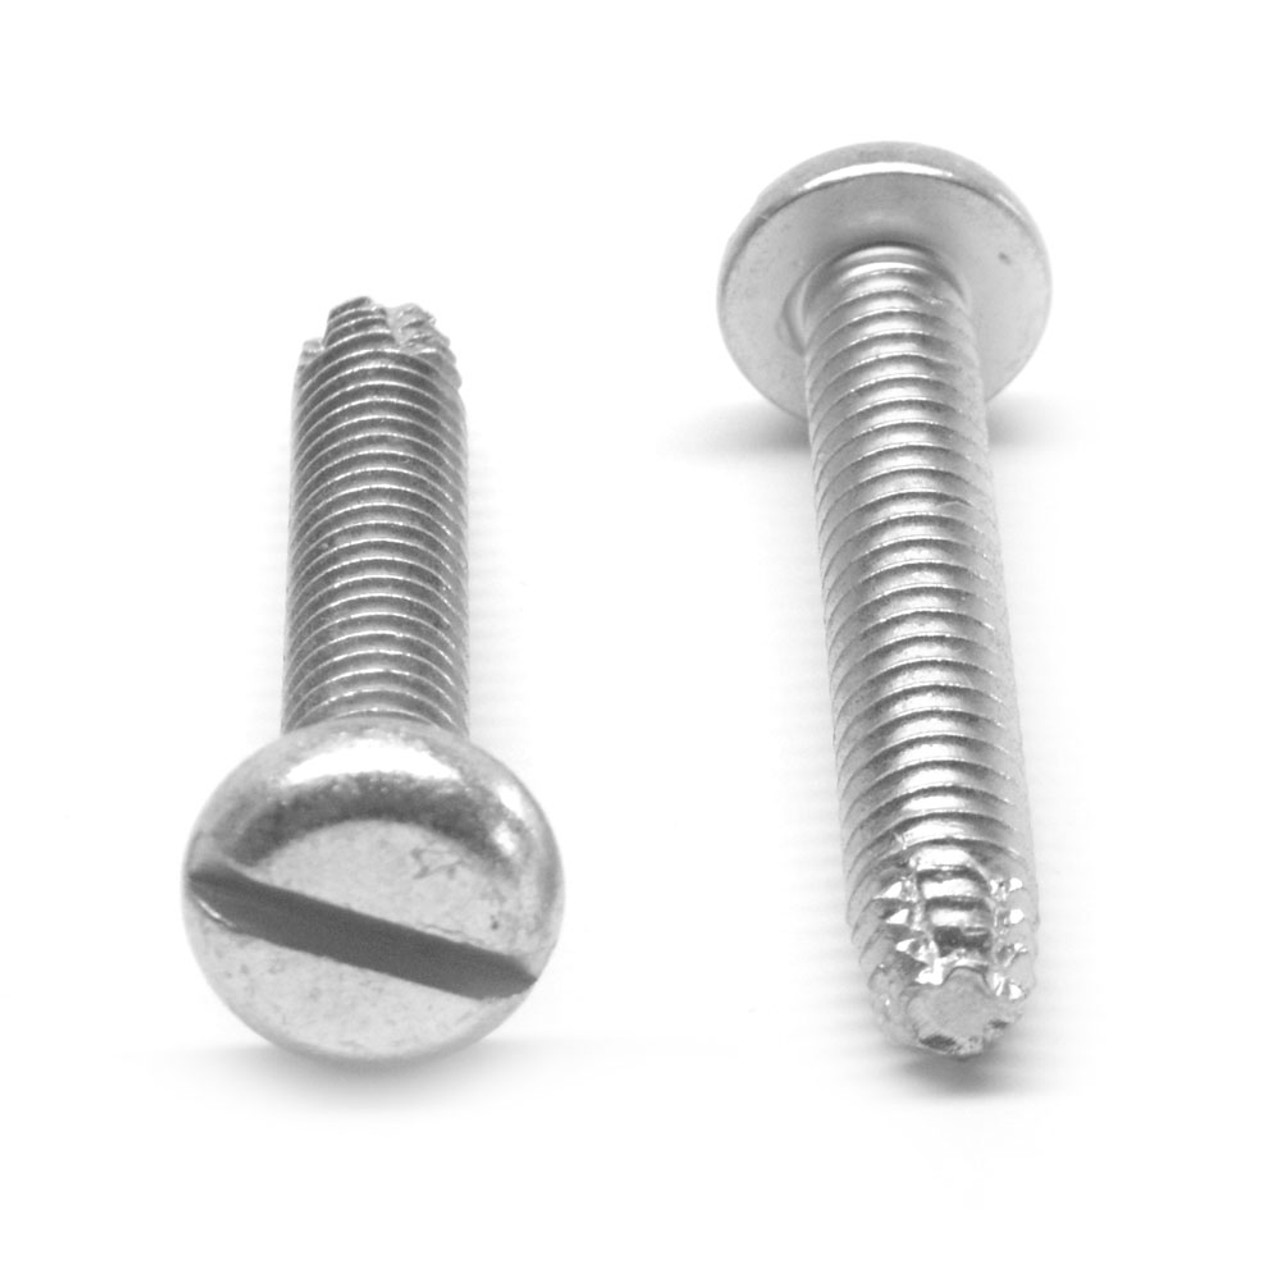 #4-40 x 3/8" (FT) Coarse Thread Thread Cutting Screw Slotted Pan Head Type F Low Carbon Steel Zinc Plated